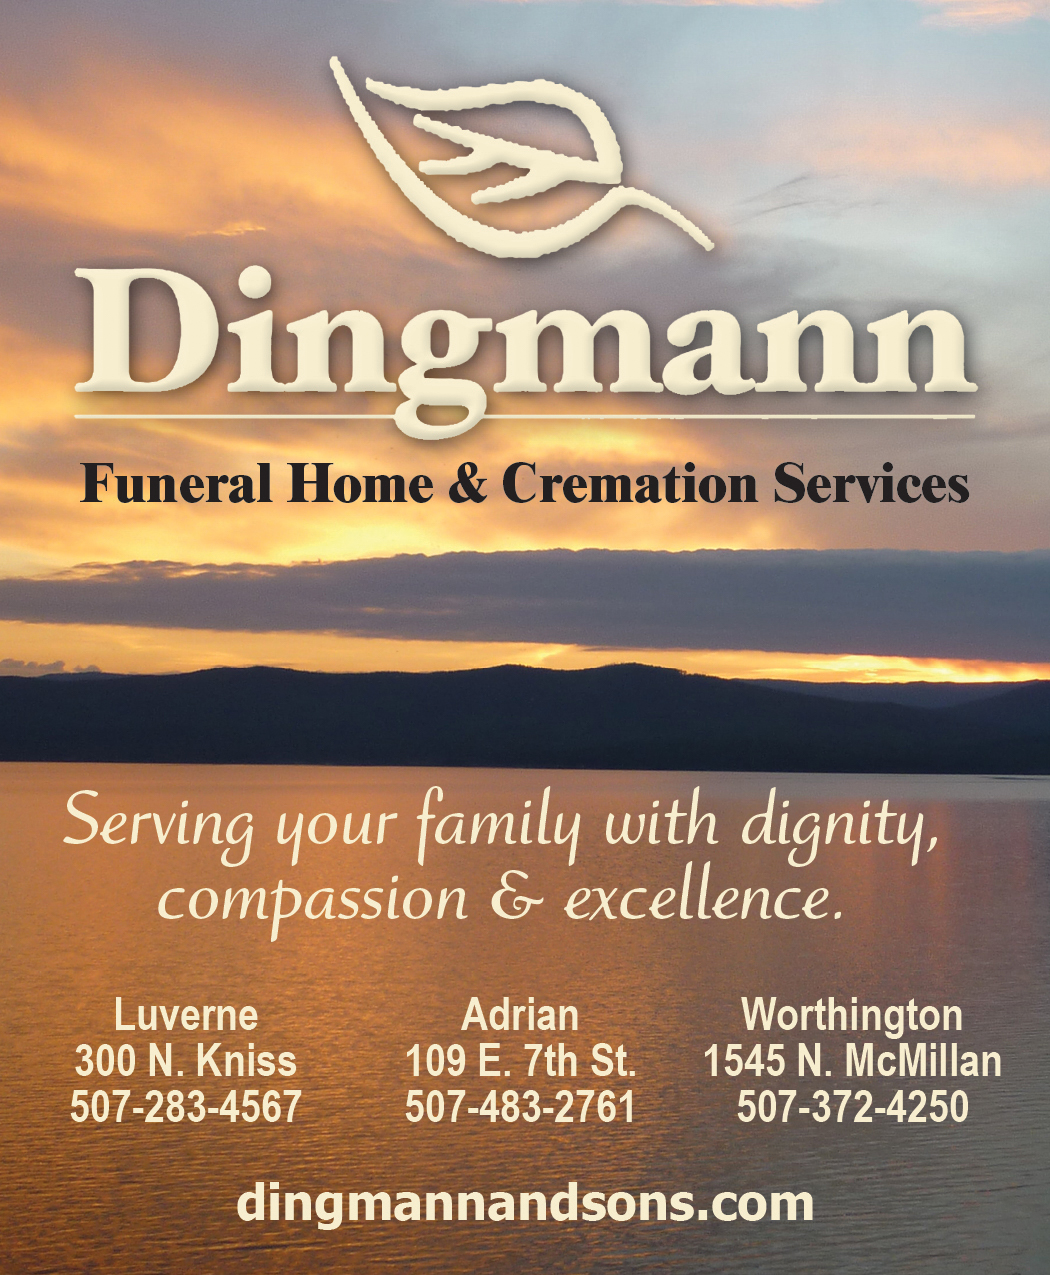 Dingmann Funeral Home & Cremation Services